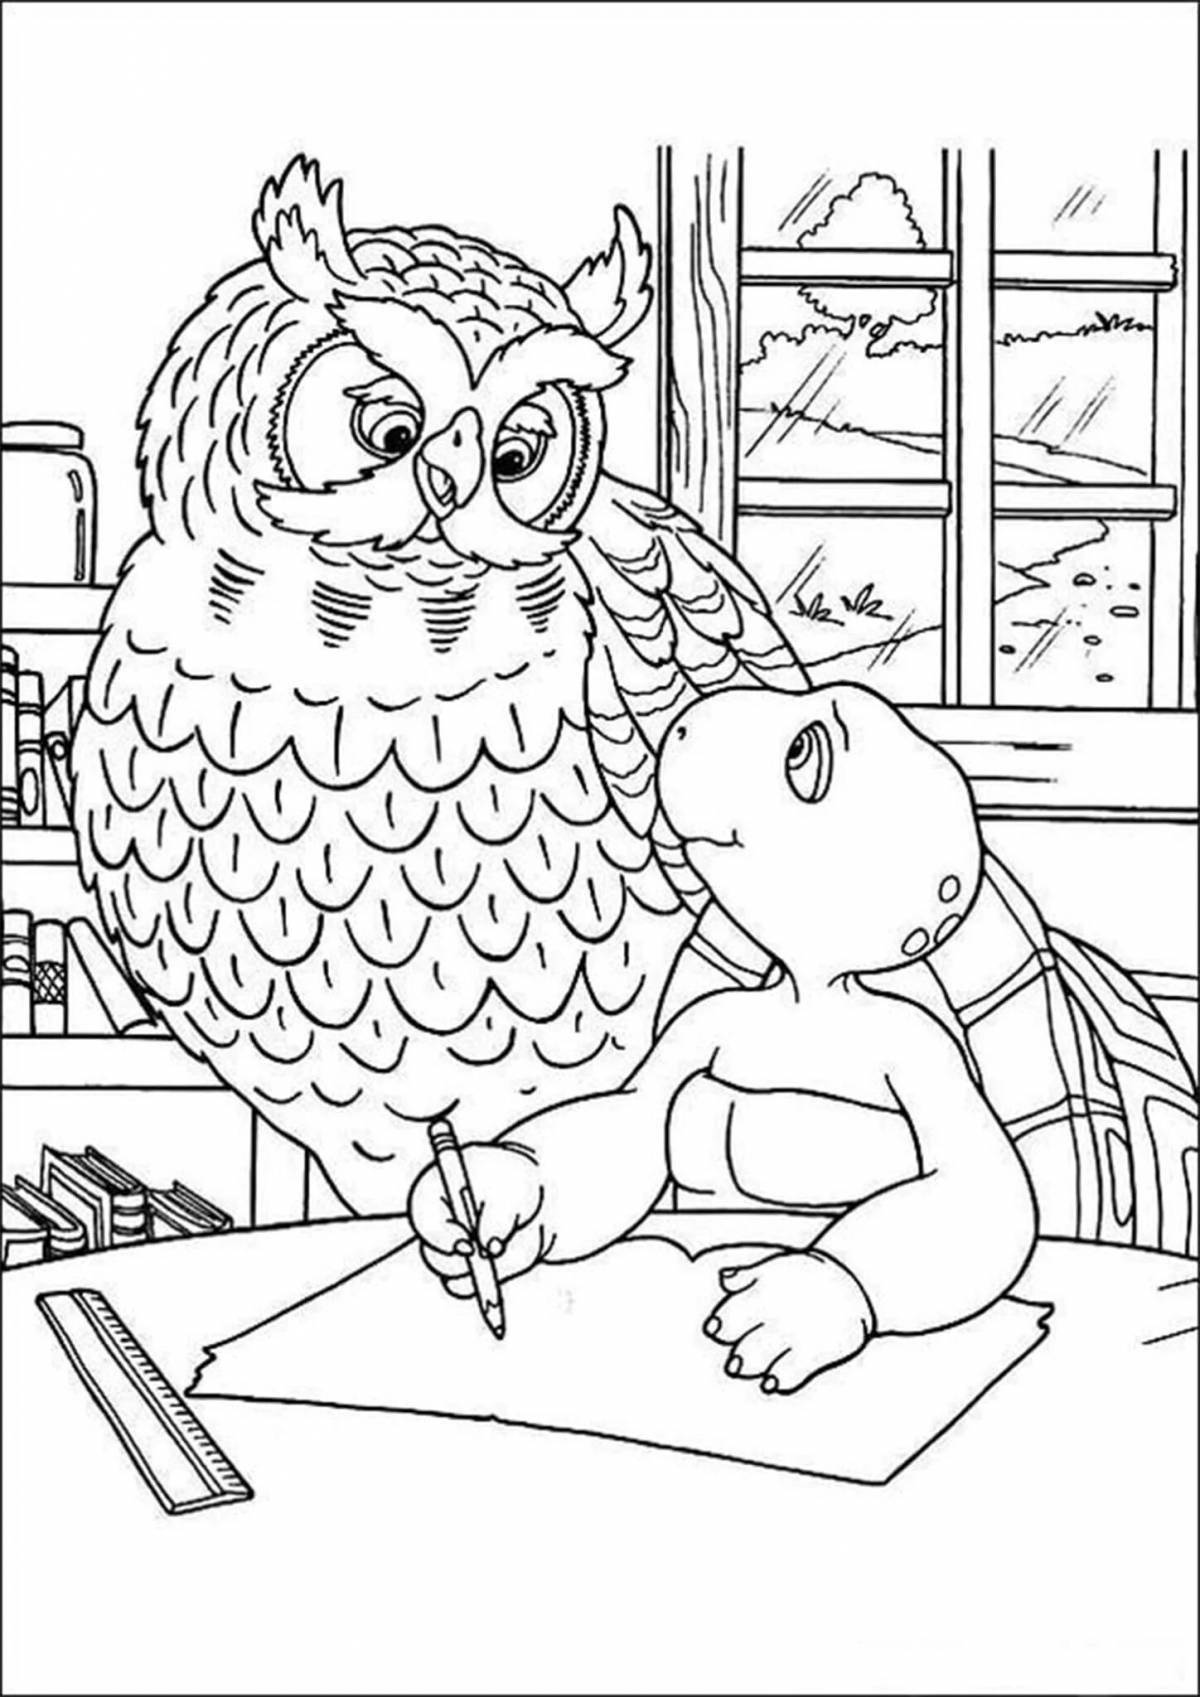 Coloring book wise owl with a crown